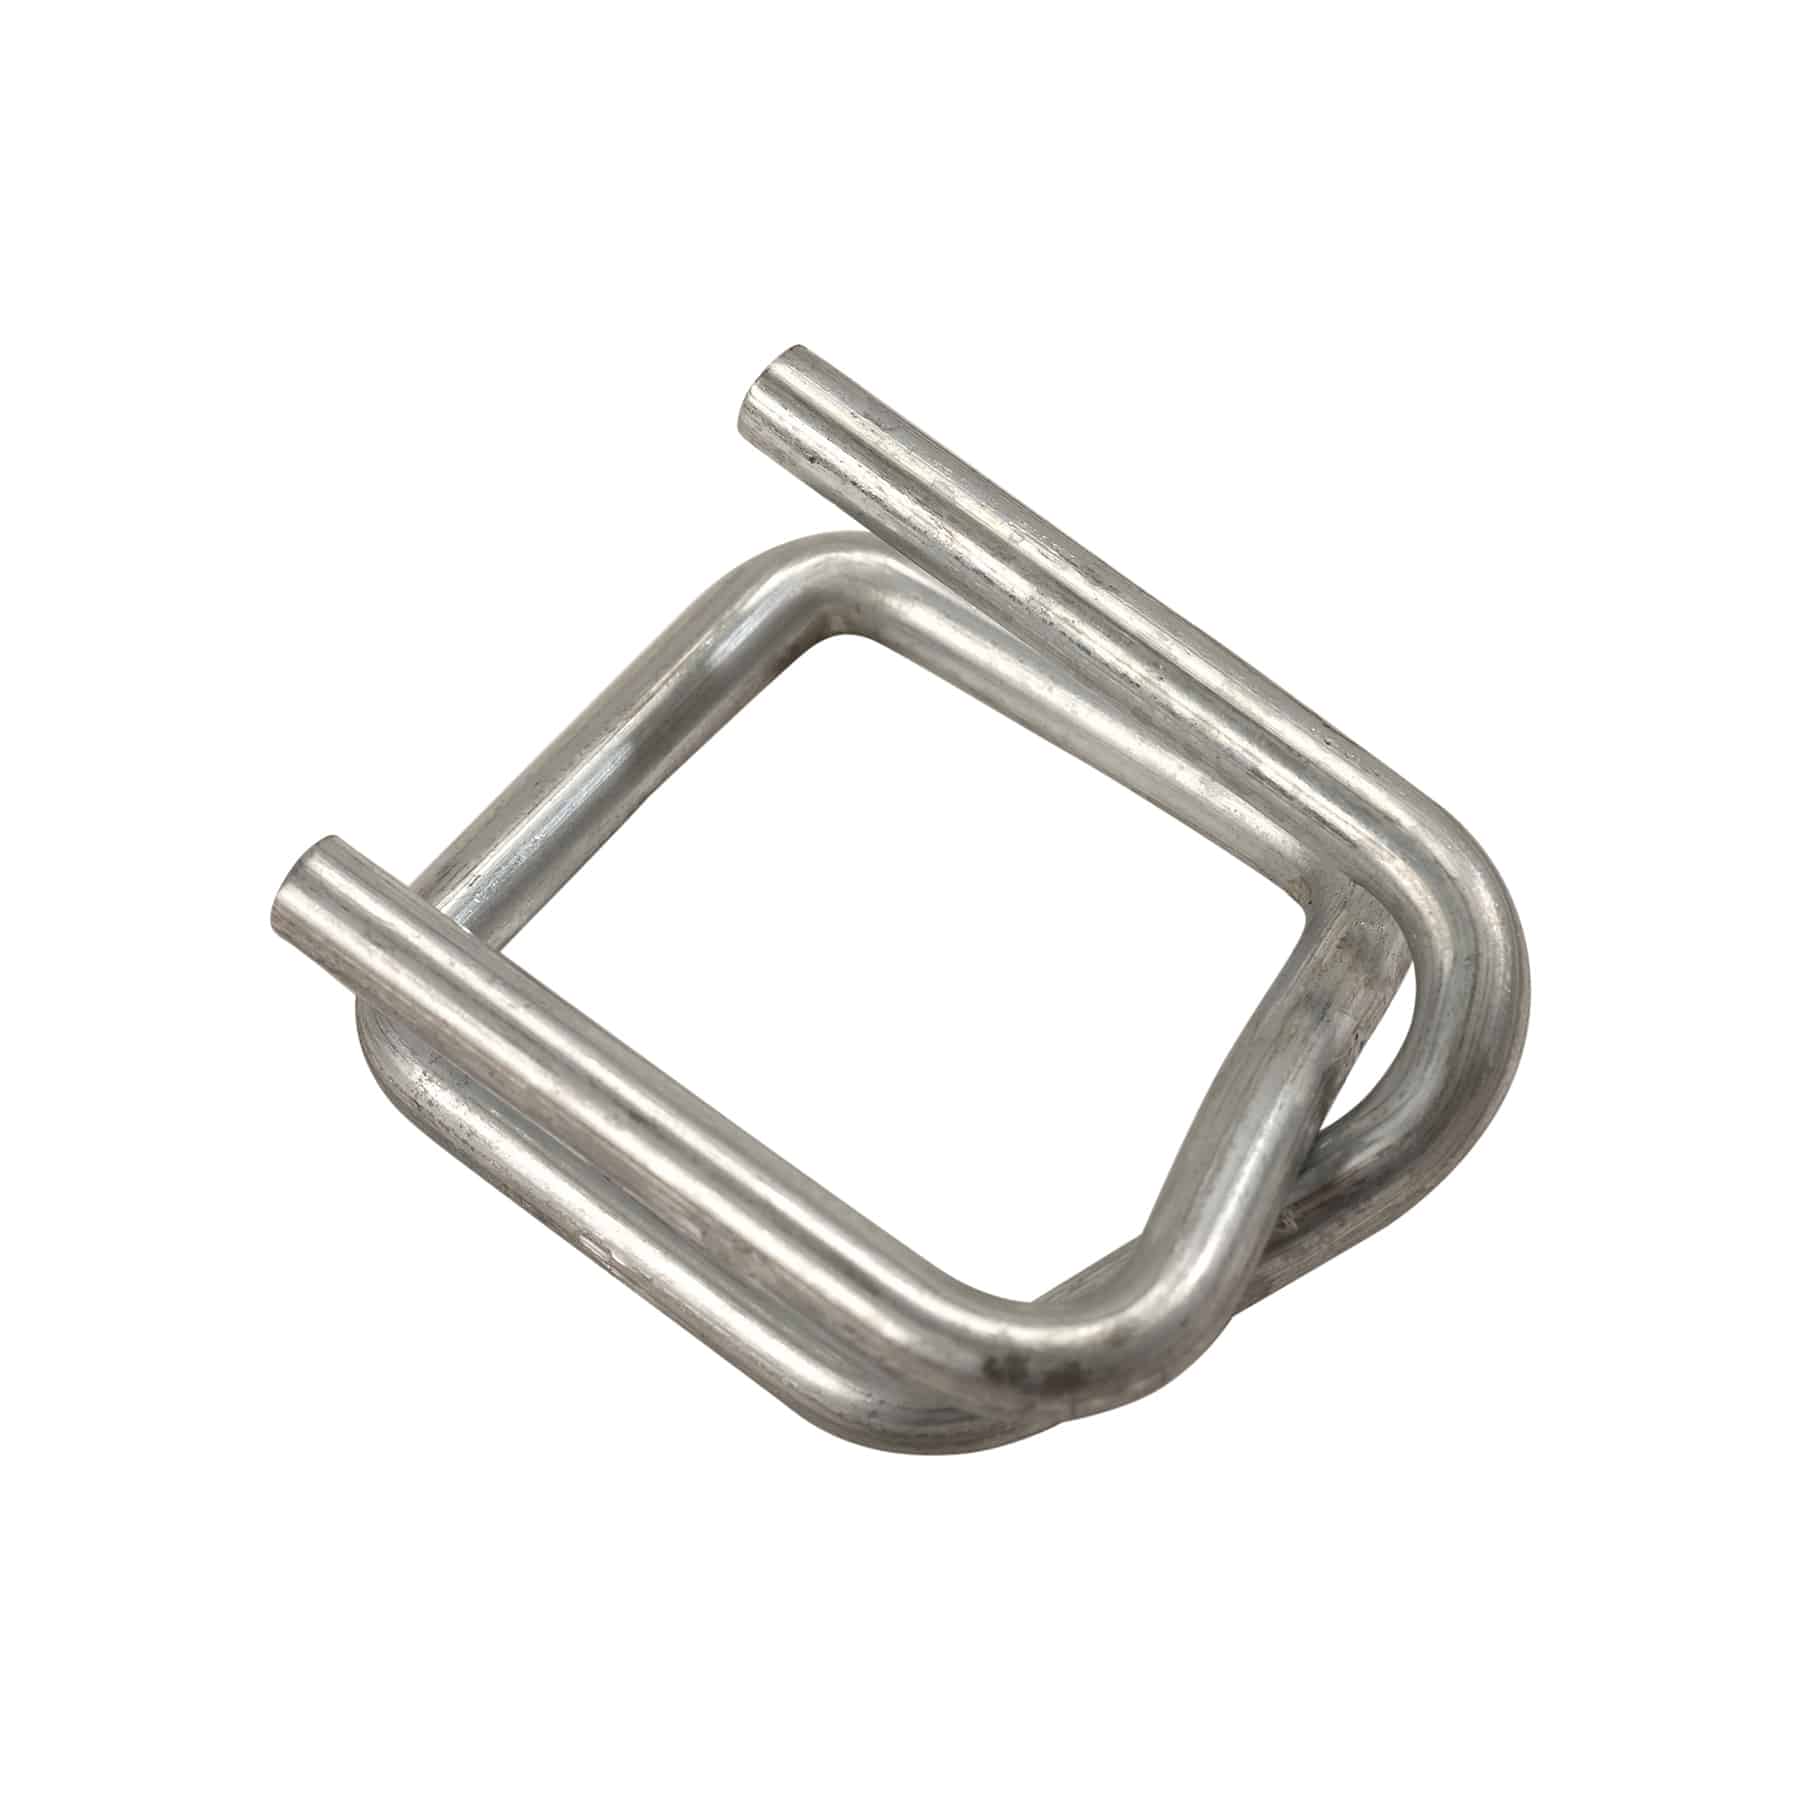 13mm Galvanised Strapping Buckles